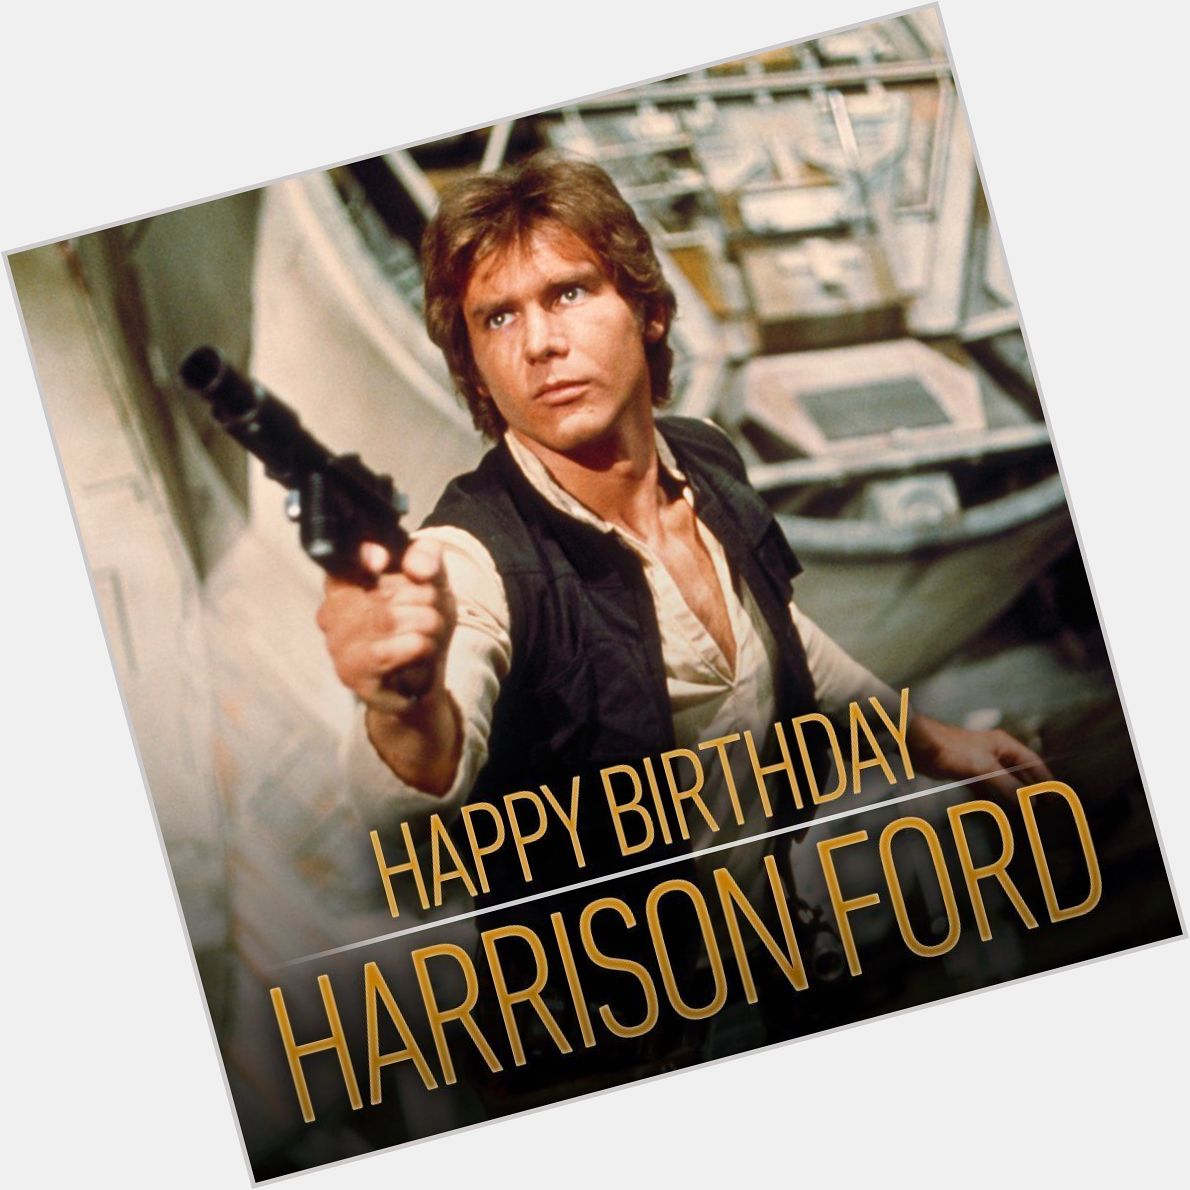 Happy Birthday to our favorite scoundrel, Harrison Ford 